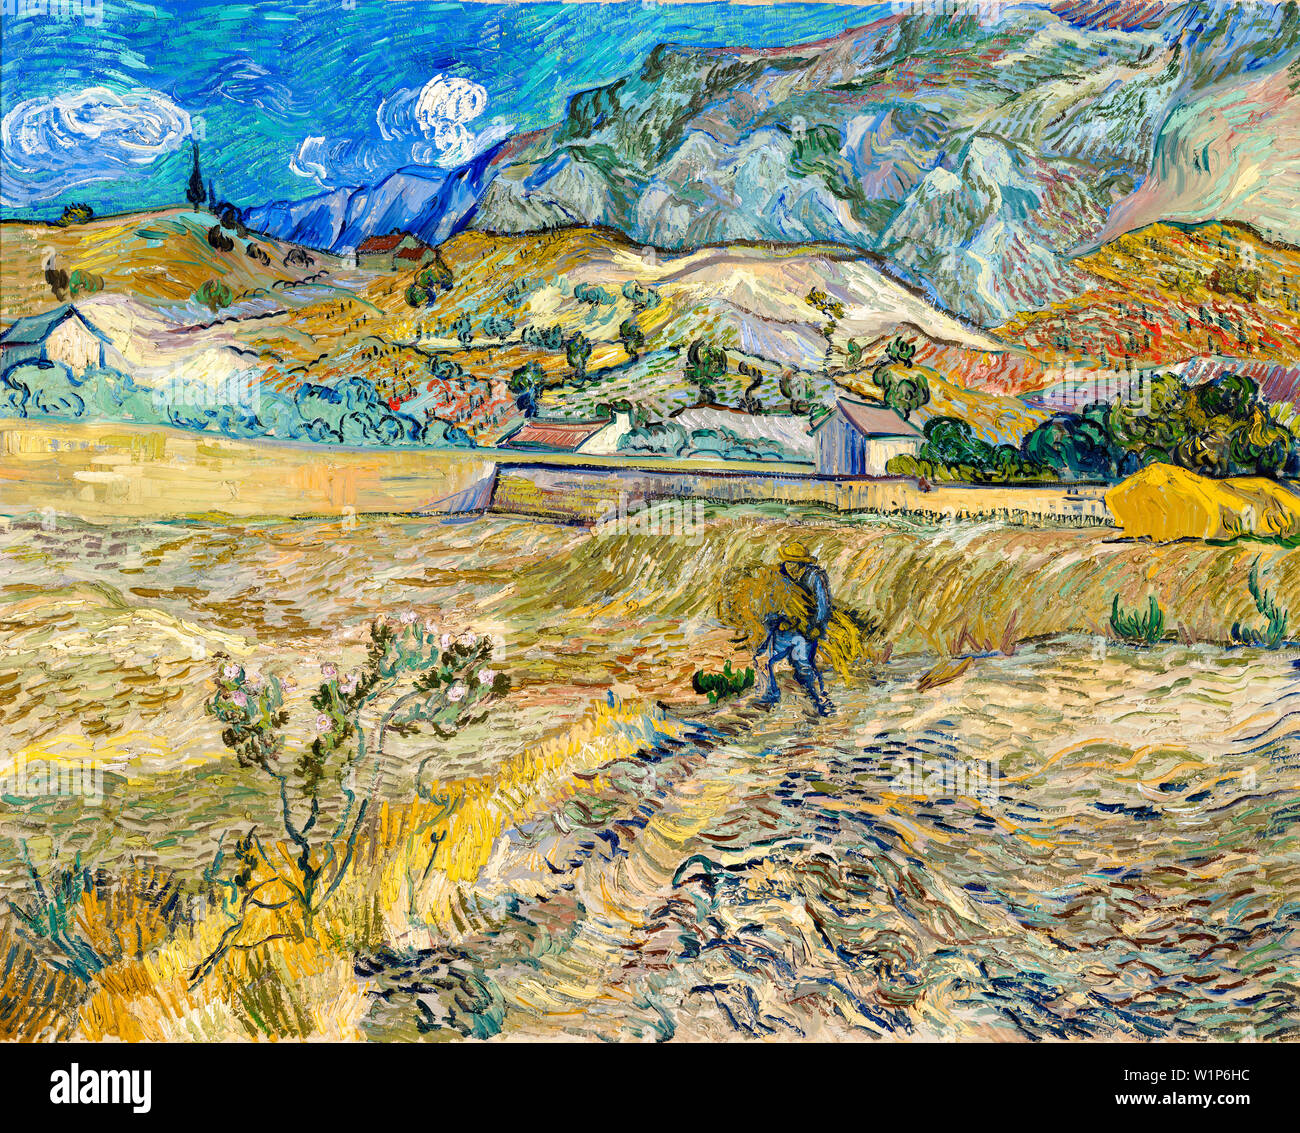 Vincent Van Gogh, Enclosed Wheat Field with Peasant, landscape painting, 1889 Stock Photo